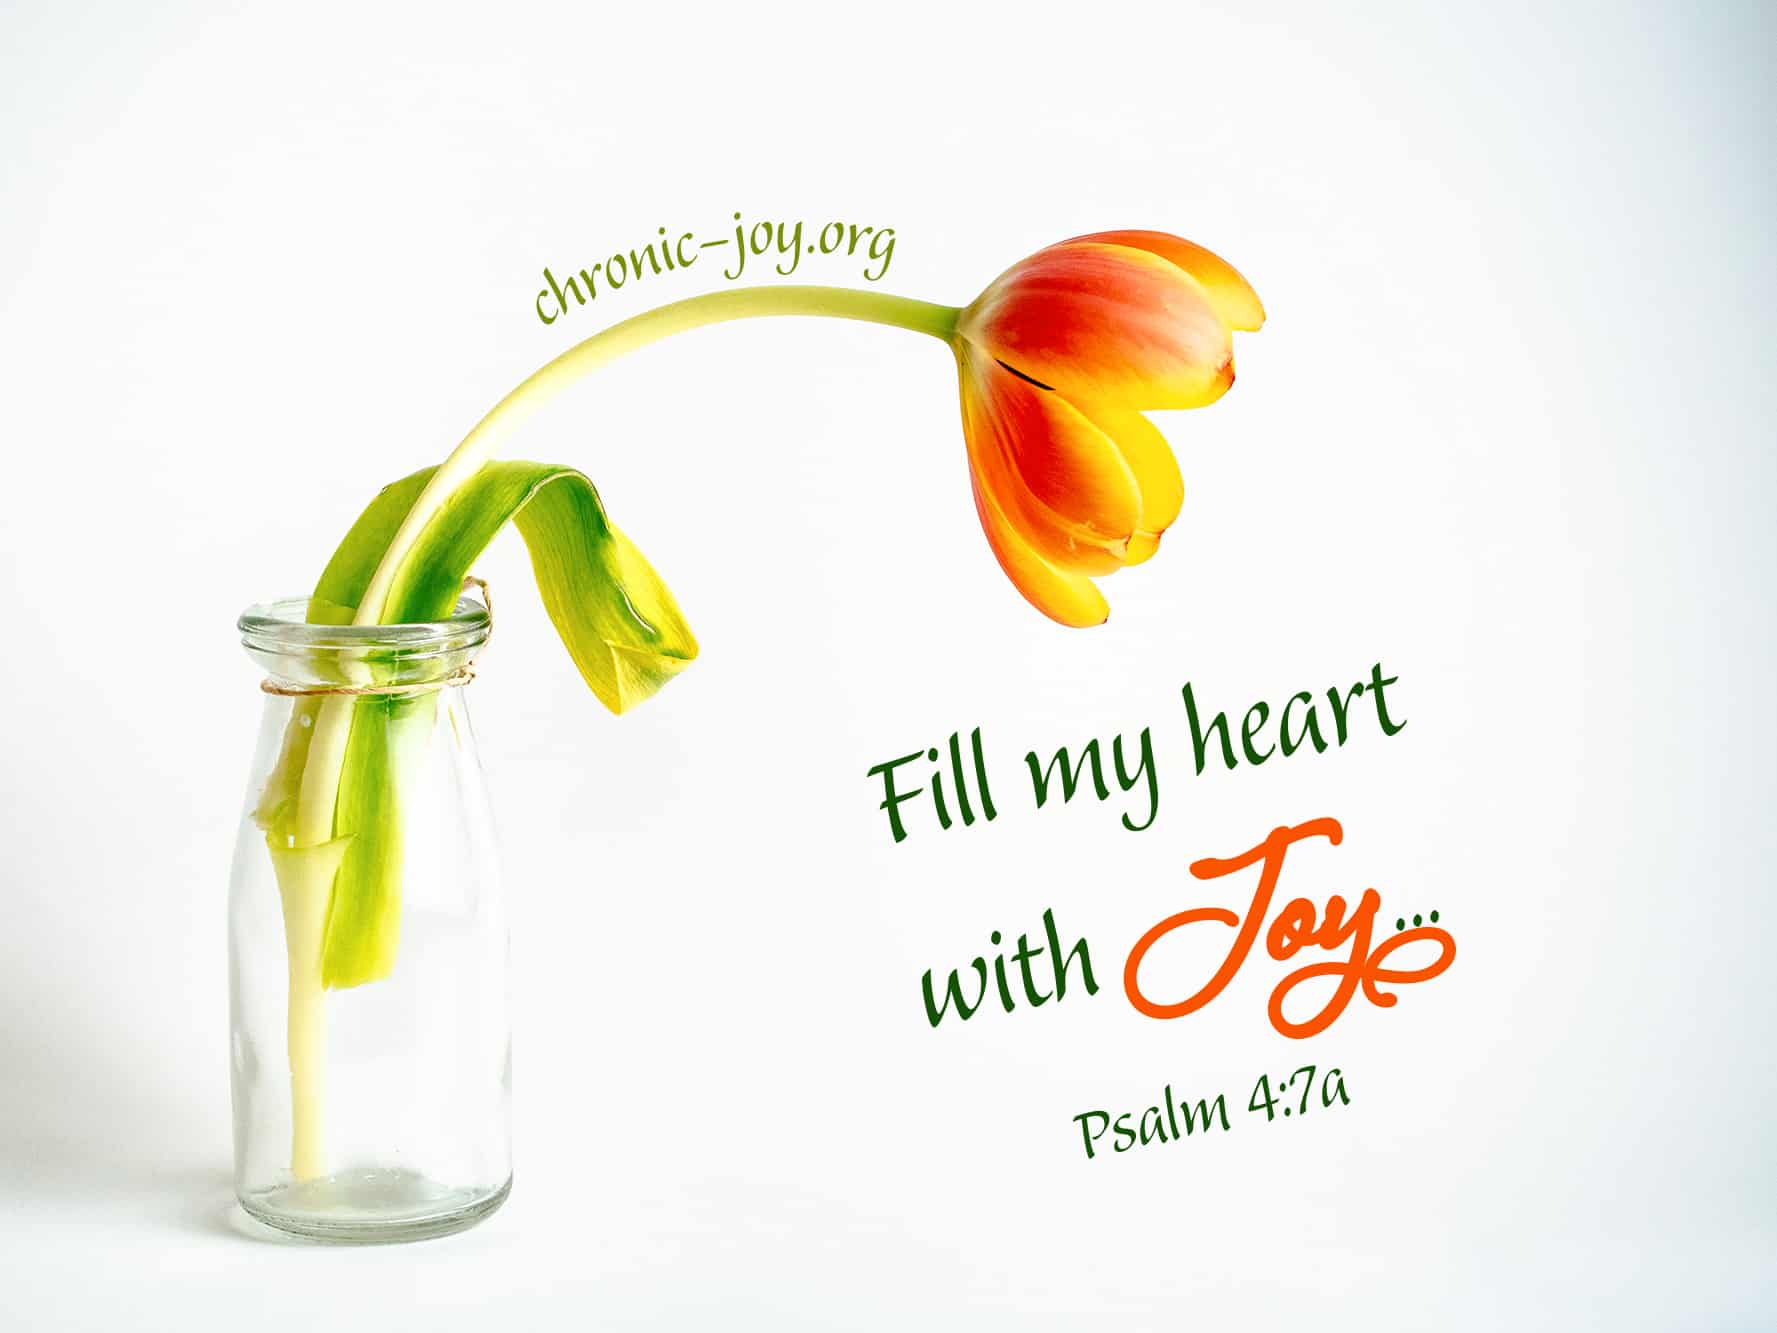 "Fill my heart with joy ..." Psalm 4:7a